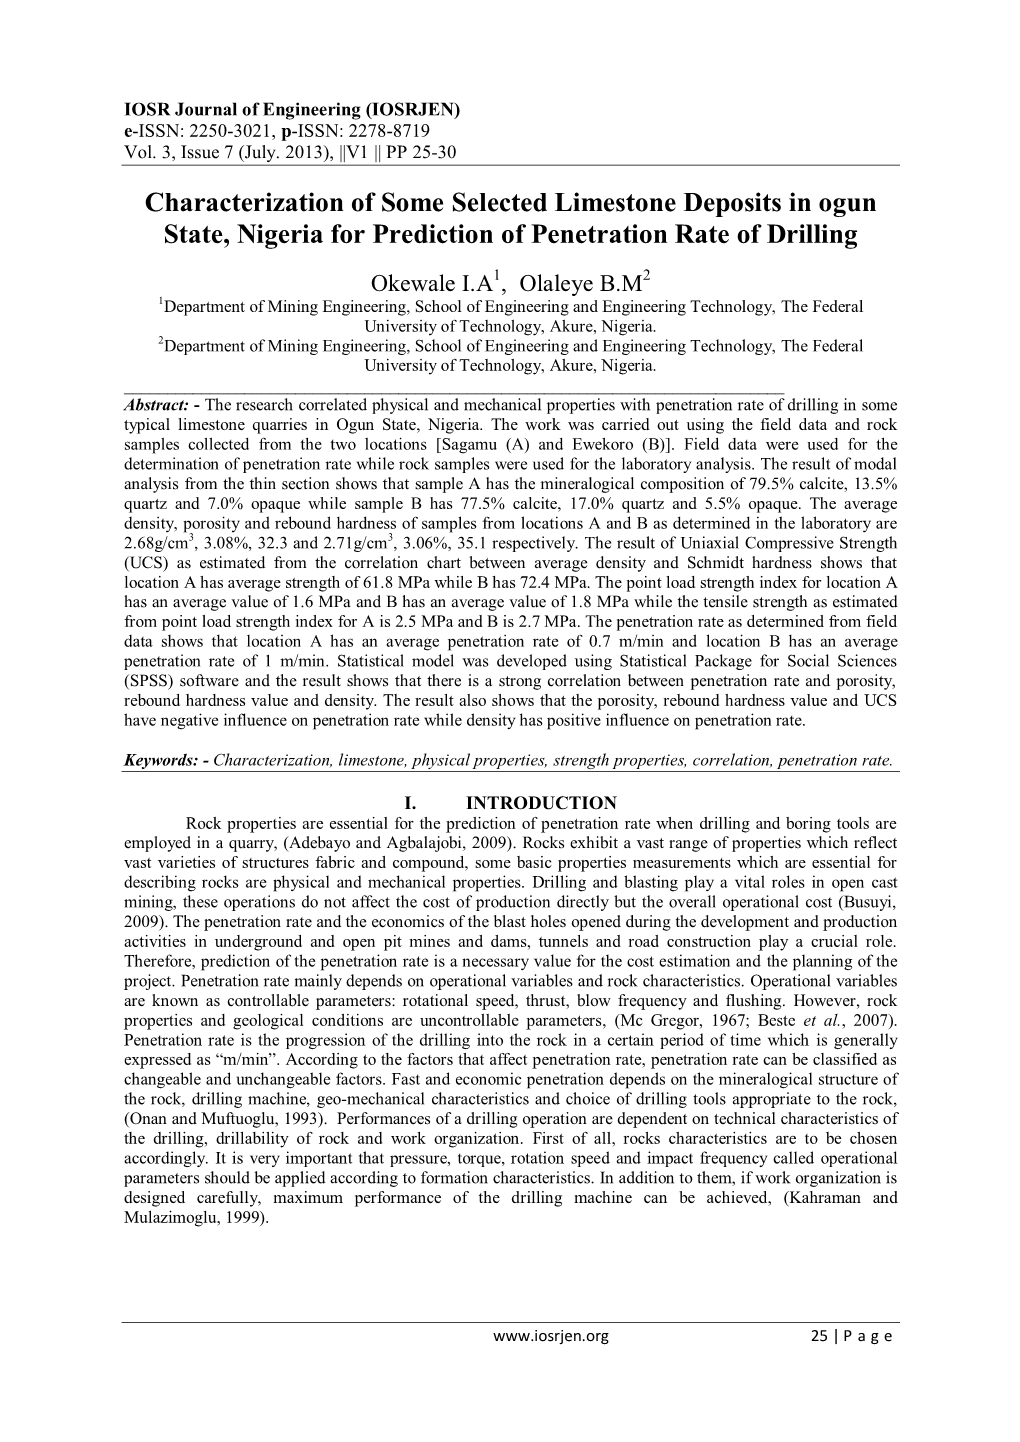 Characterization of Some Selected Limestone Deposits in Ogun State, Nigeria for Prediction of Penetration Rate of Drilling